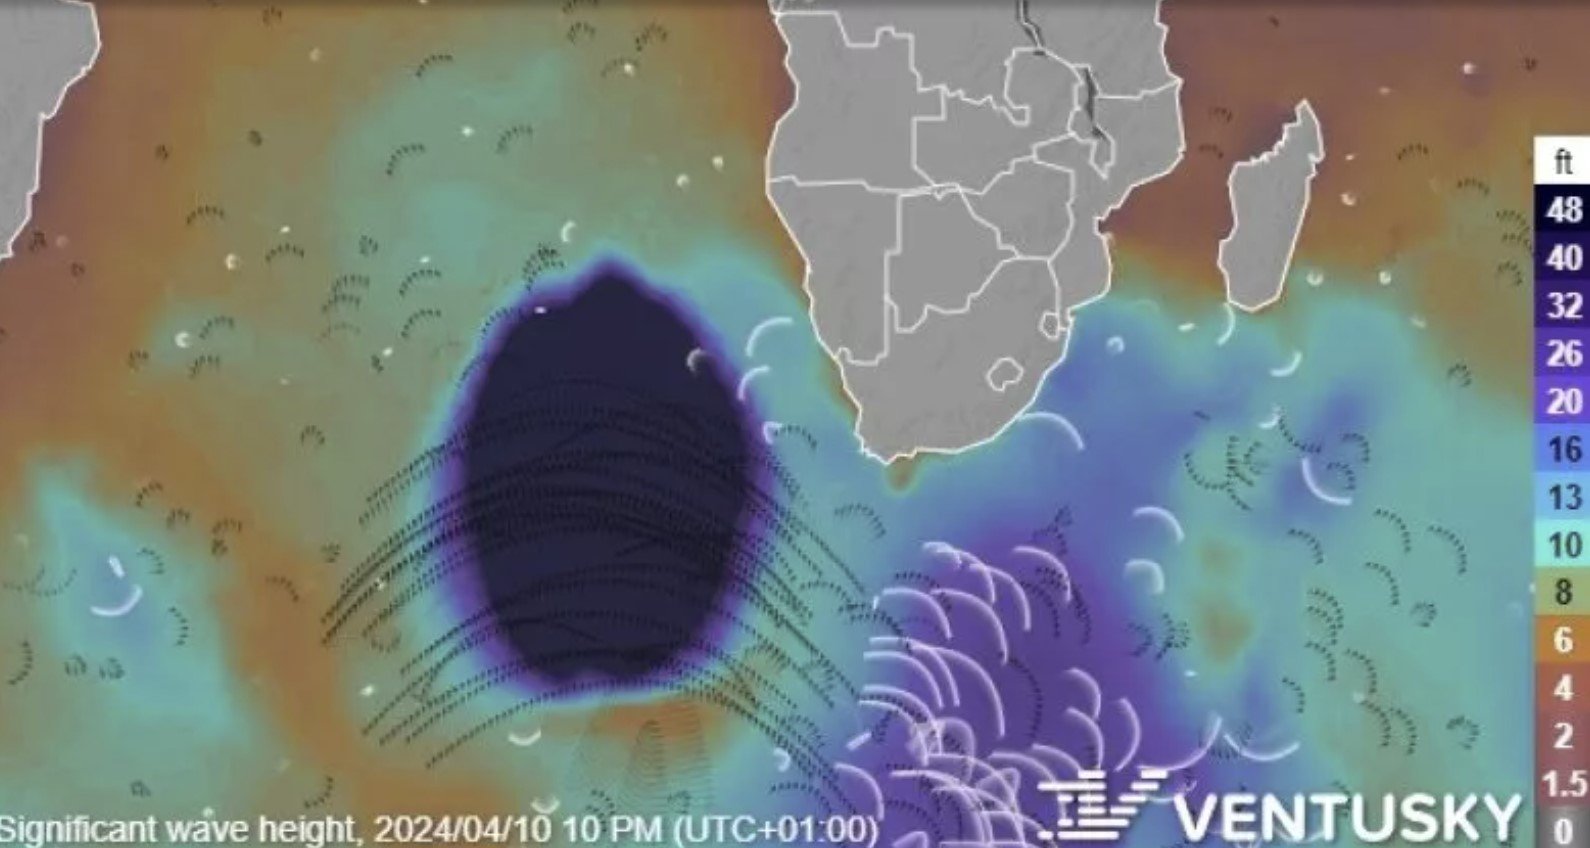 Mysterious wave anomaly appears on weather-mapping system moving from Antarctica along Western Africa coast - Strange Sounds